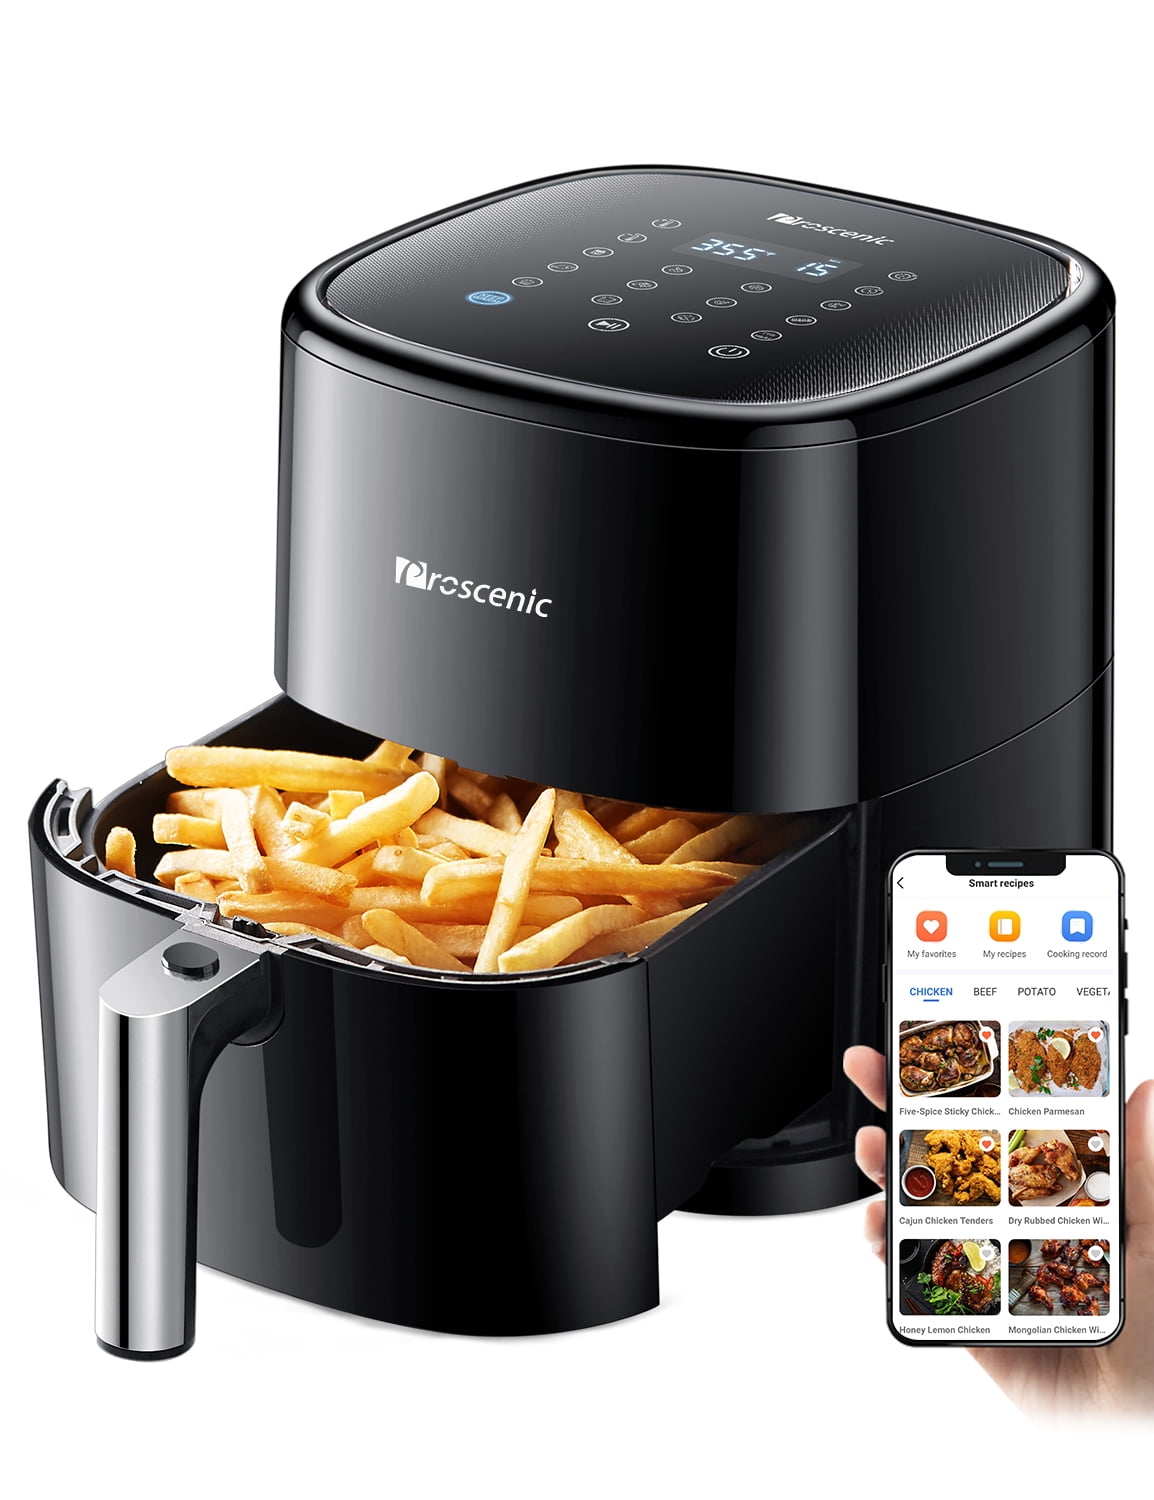 Proscenic T22 Air Fryer review − from a pro product tester